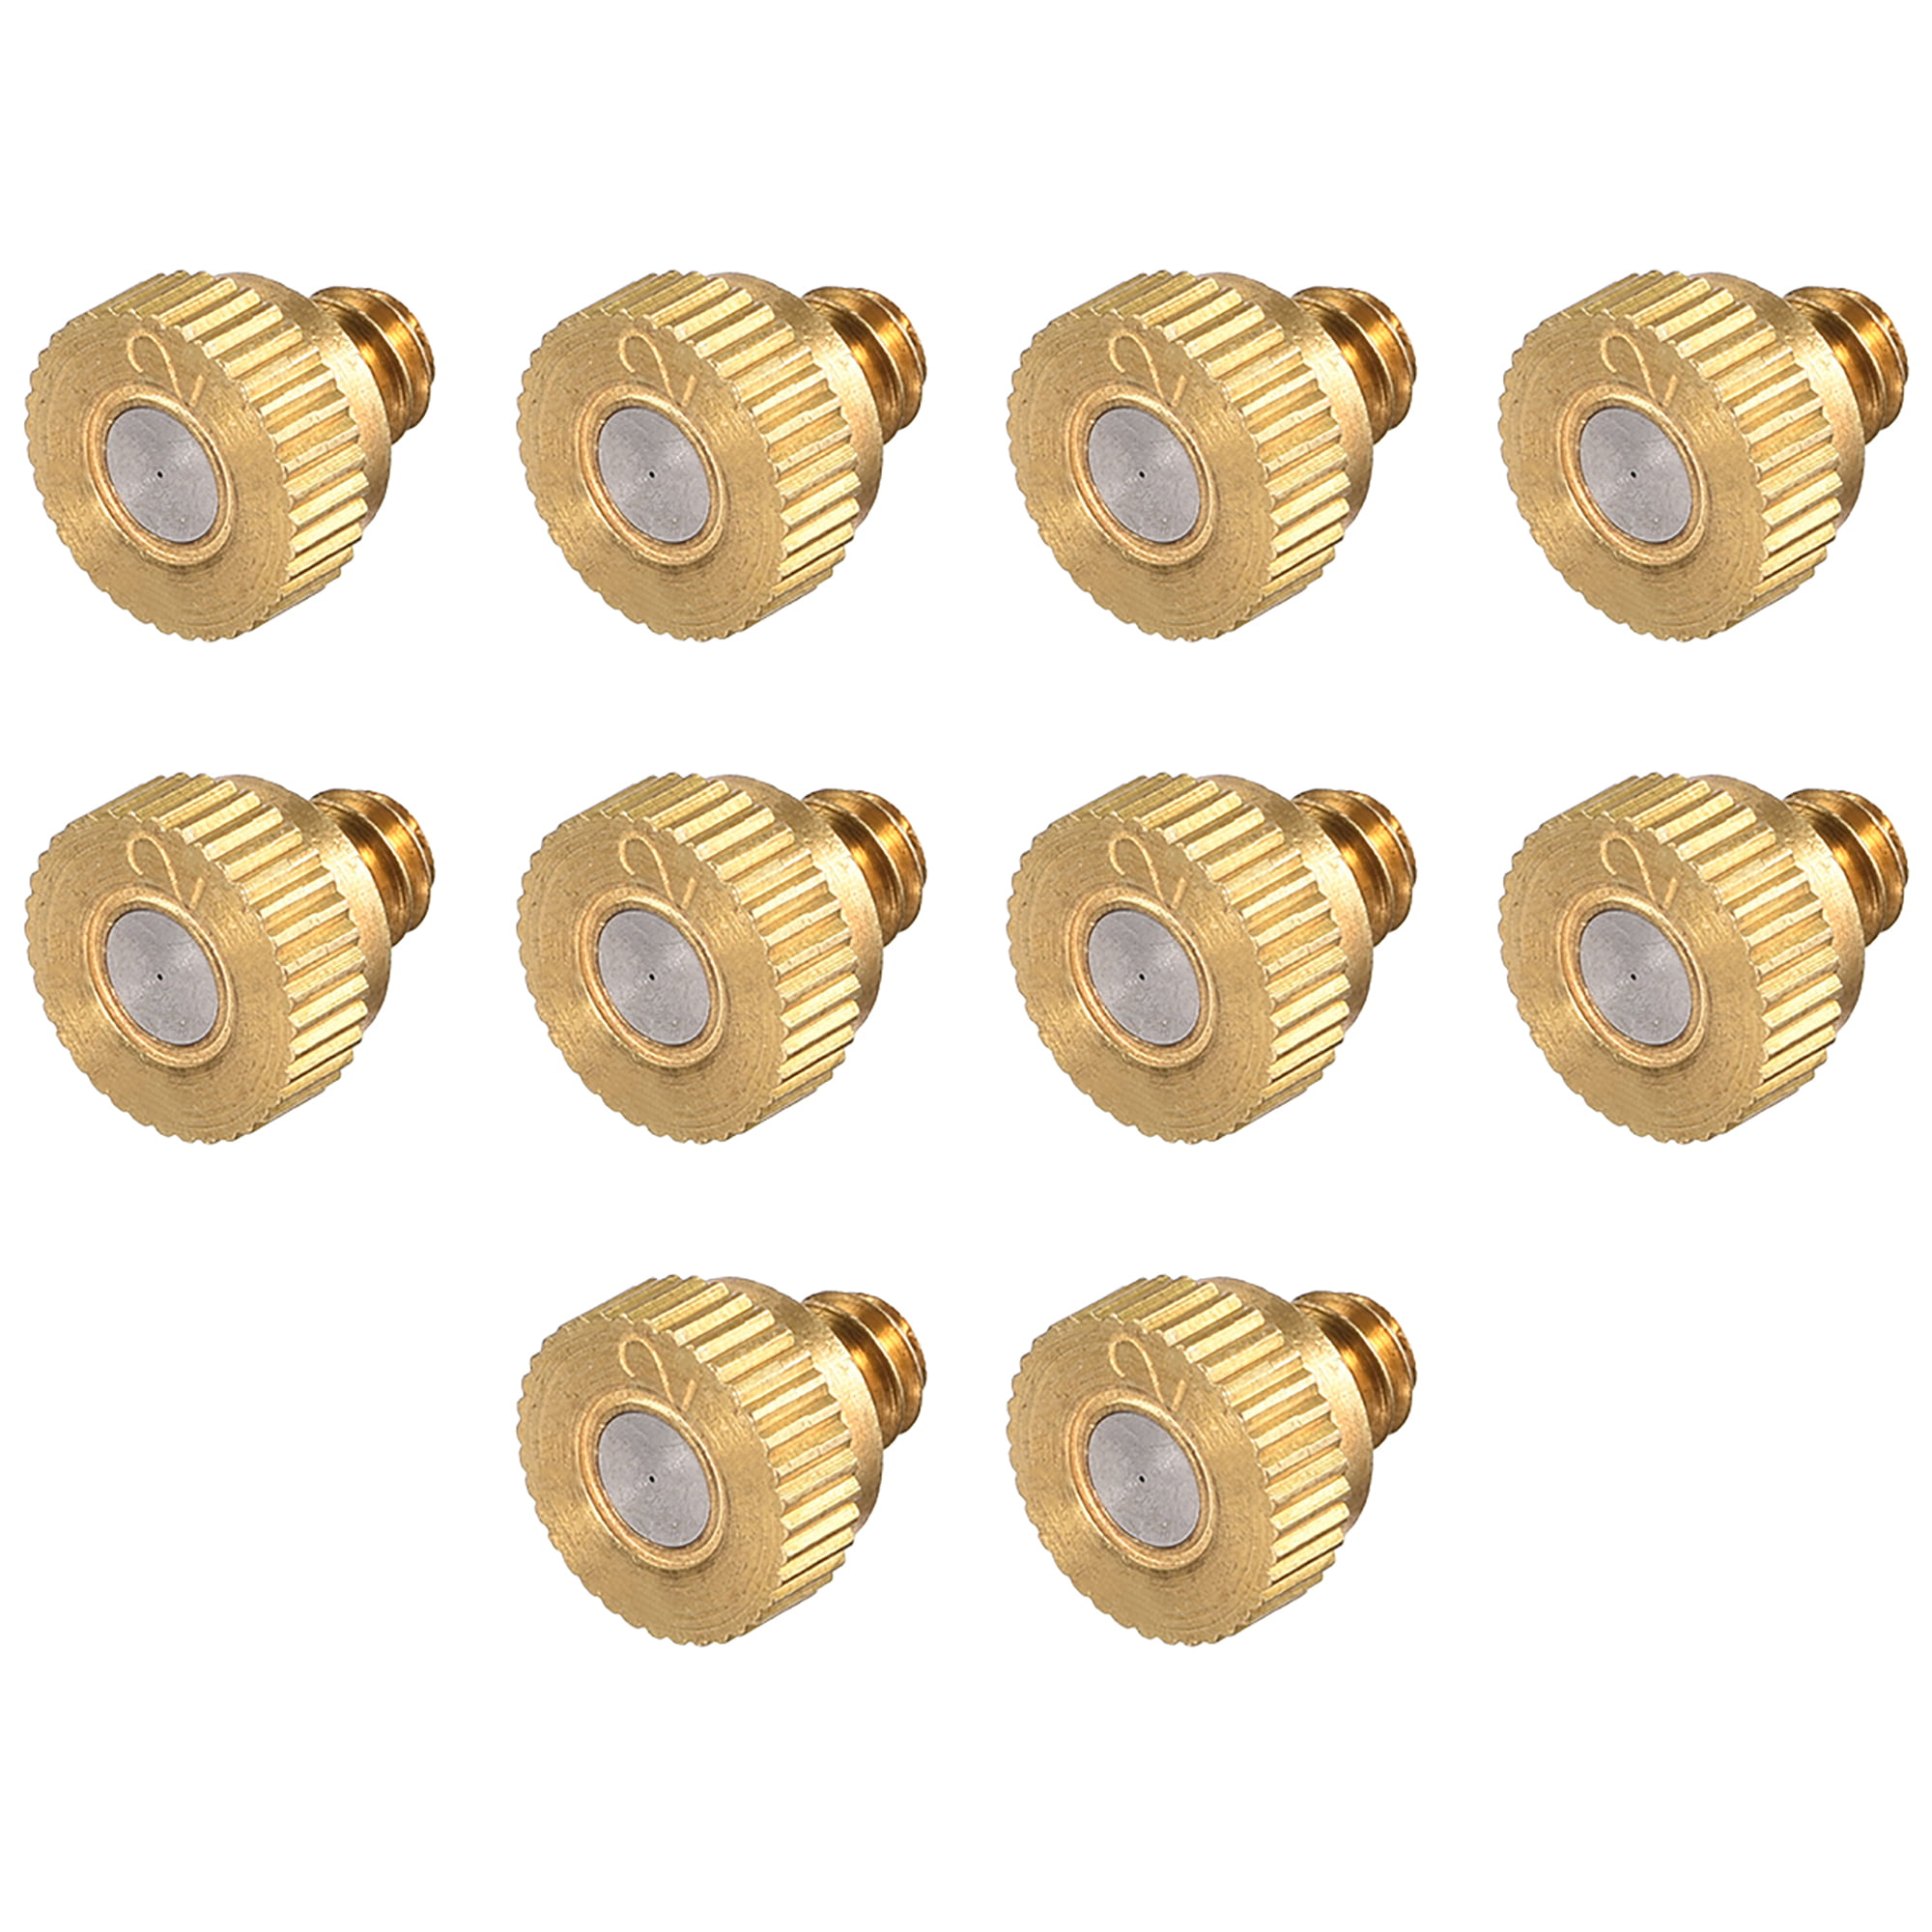 0.3mm 10 20 30 pcs Brass Misting Nozzles For Cooling System 0.012" 10/24 UNC